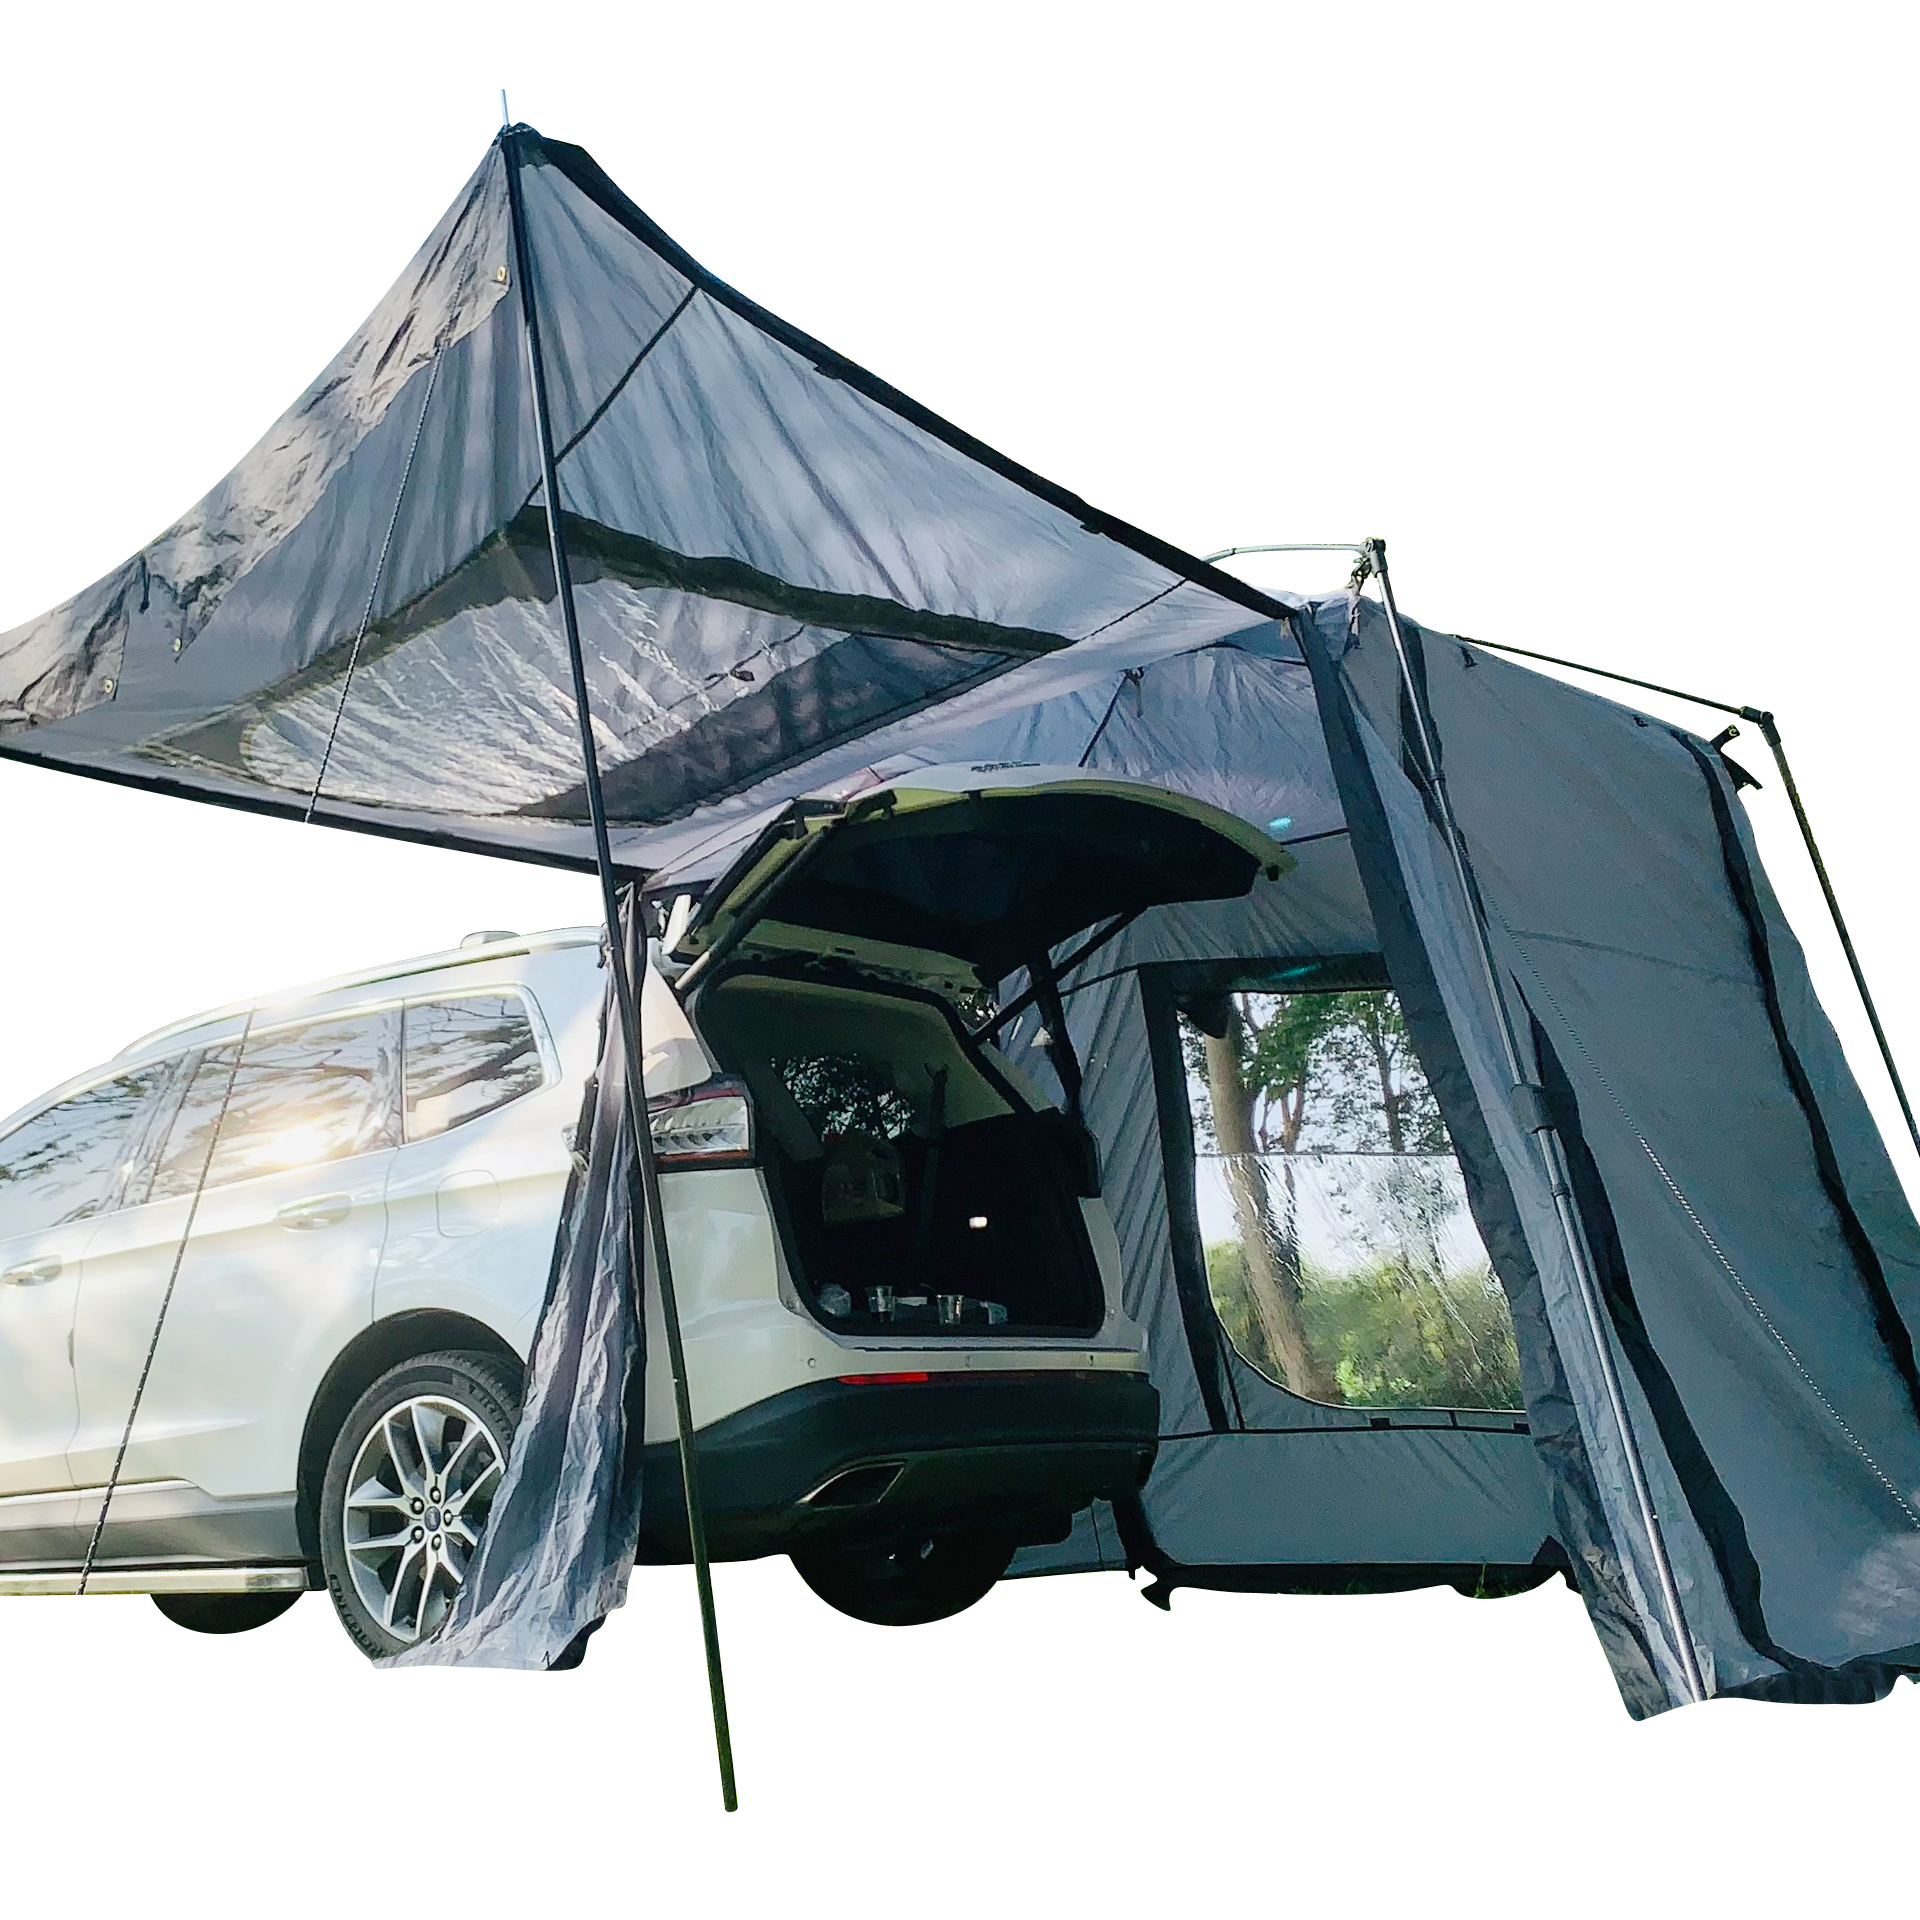 Car Rear Awning Car Rear Extension Outdoor Automatic Bracket Camper Car Rear Tent Car Awning Mosquito Net Sun Protection Against Rain